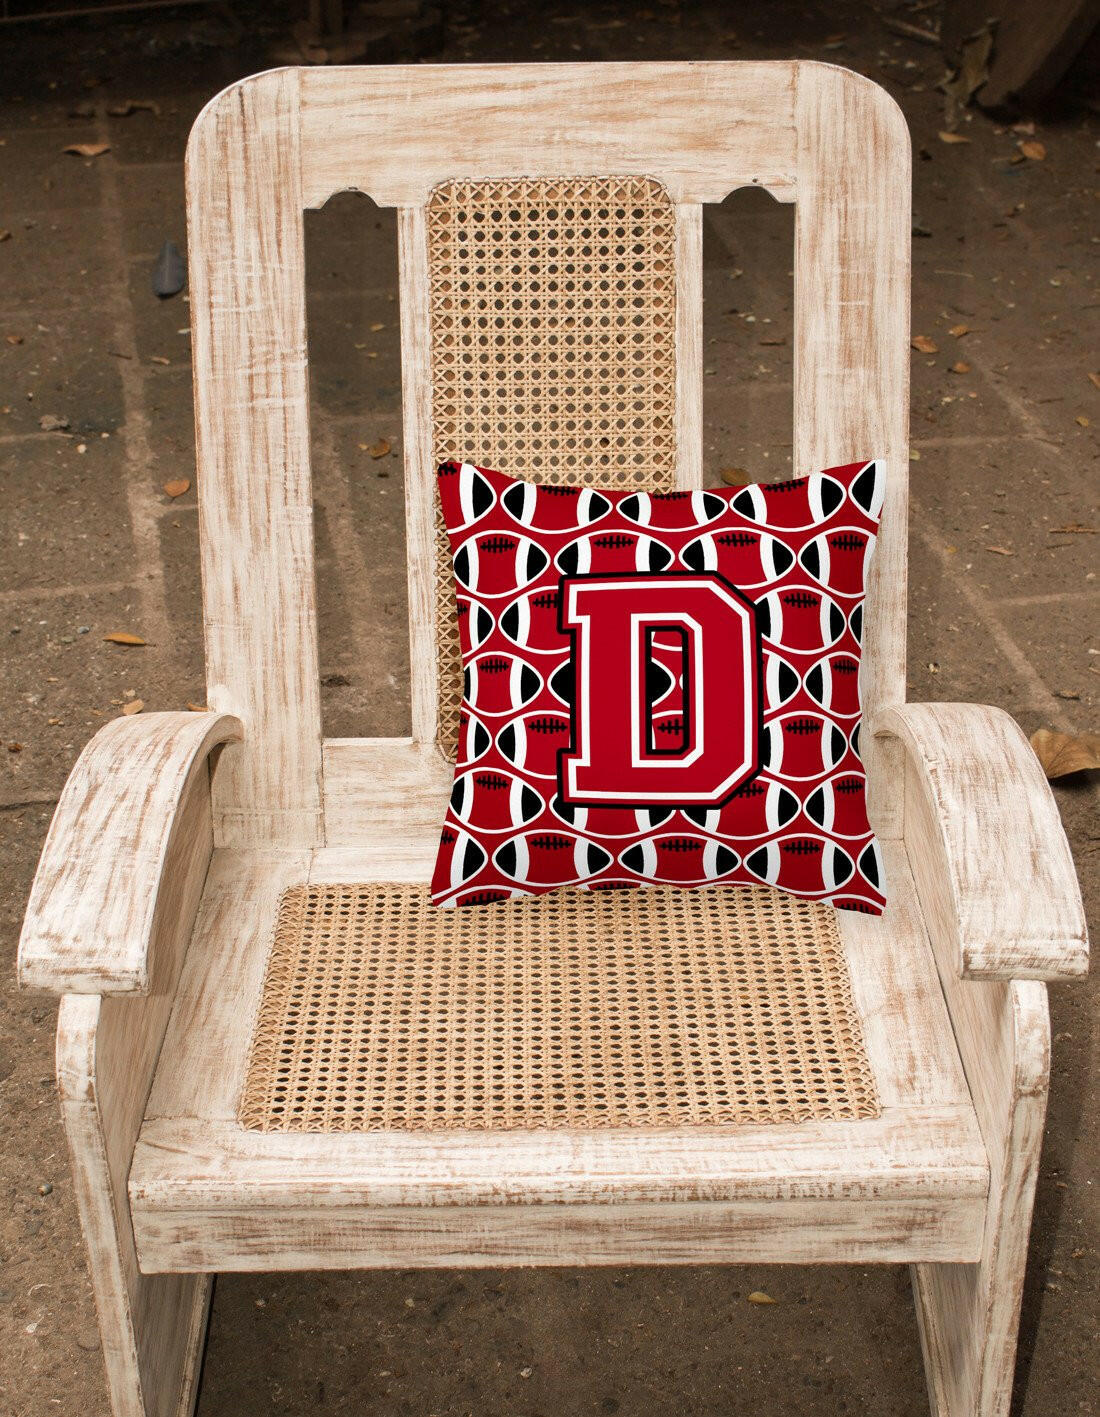 Letter D Football Red, Black and White Fabric Decorative Pillow CJ1073-DPW1414 by Caroline's Treasures